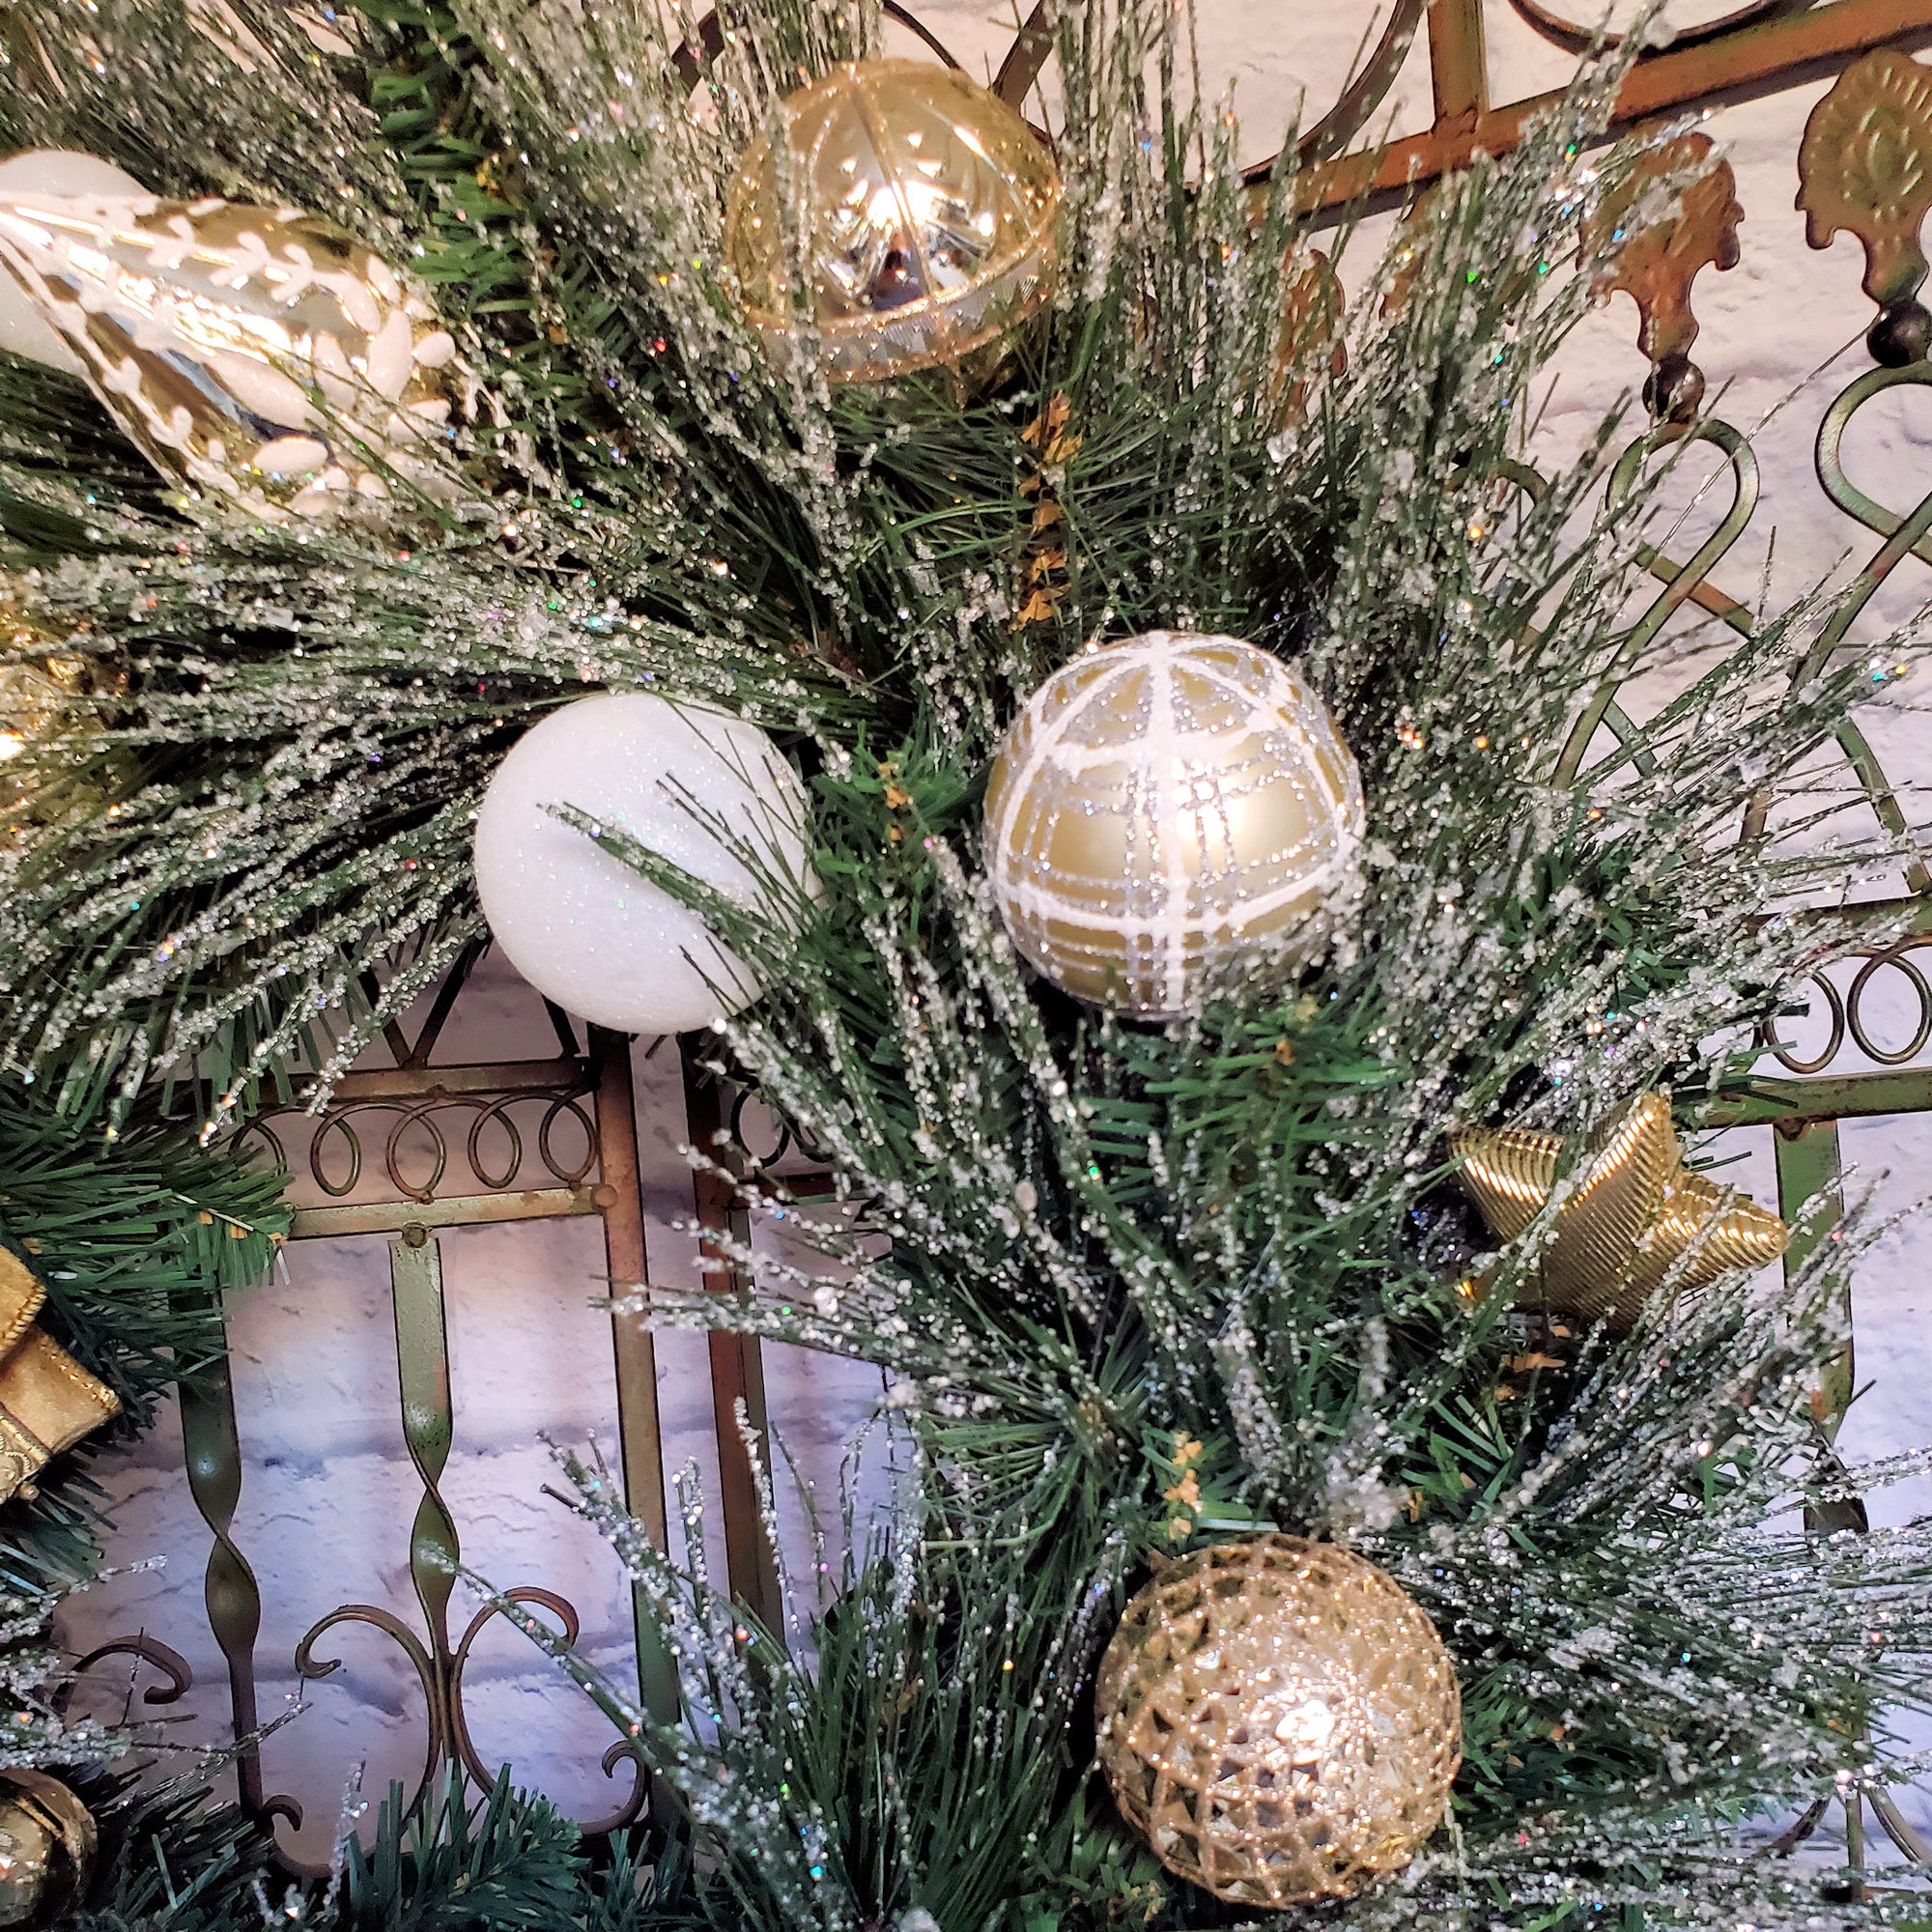 Shatterproof Ornaments include round, star , bell and acorn shaped ornaments.